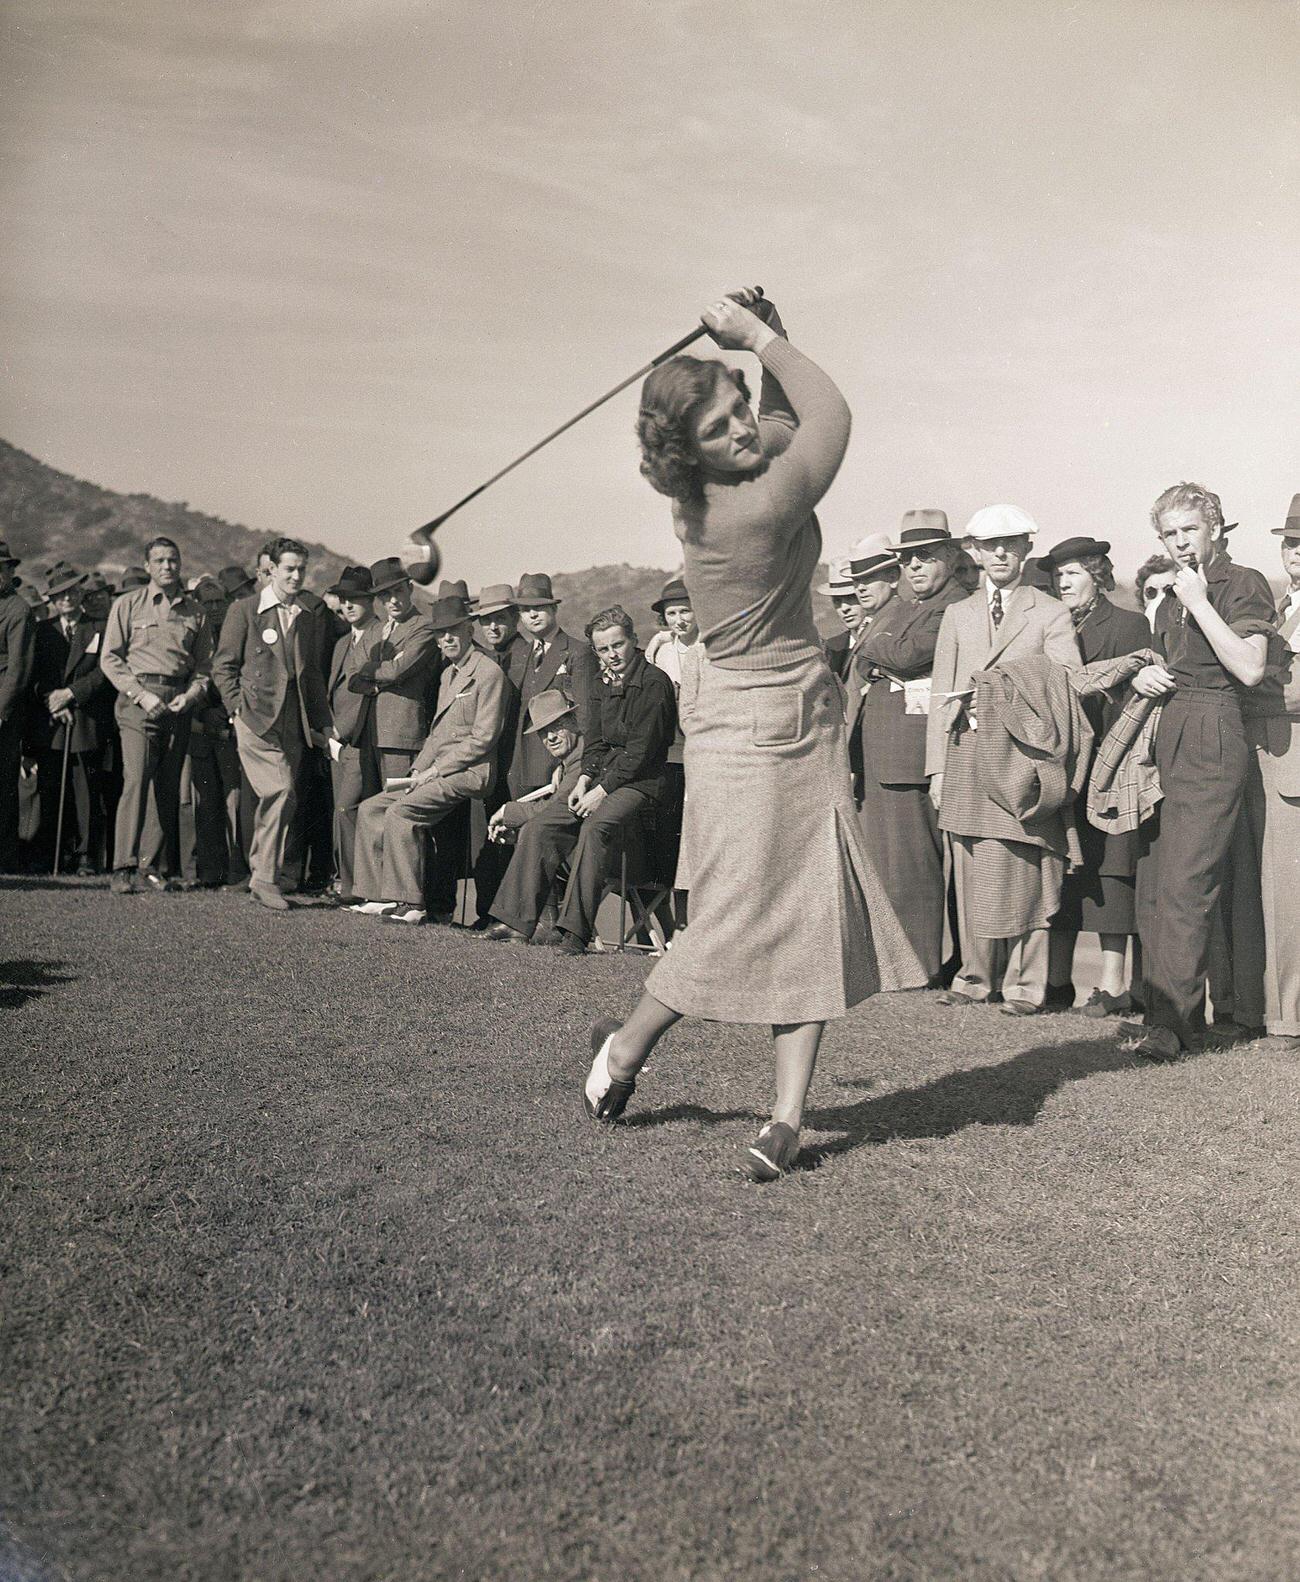 Babe Didrikson driving, 13th annual Los Angeles Open Golf Tournament, January 8, 1938.